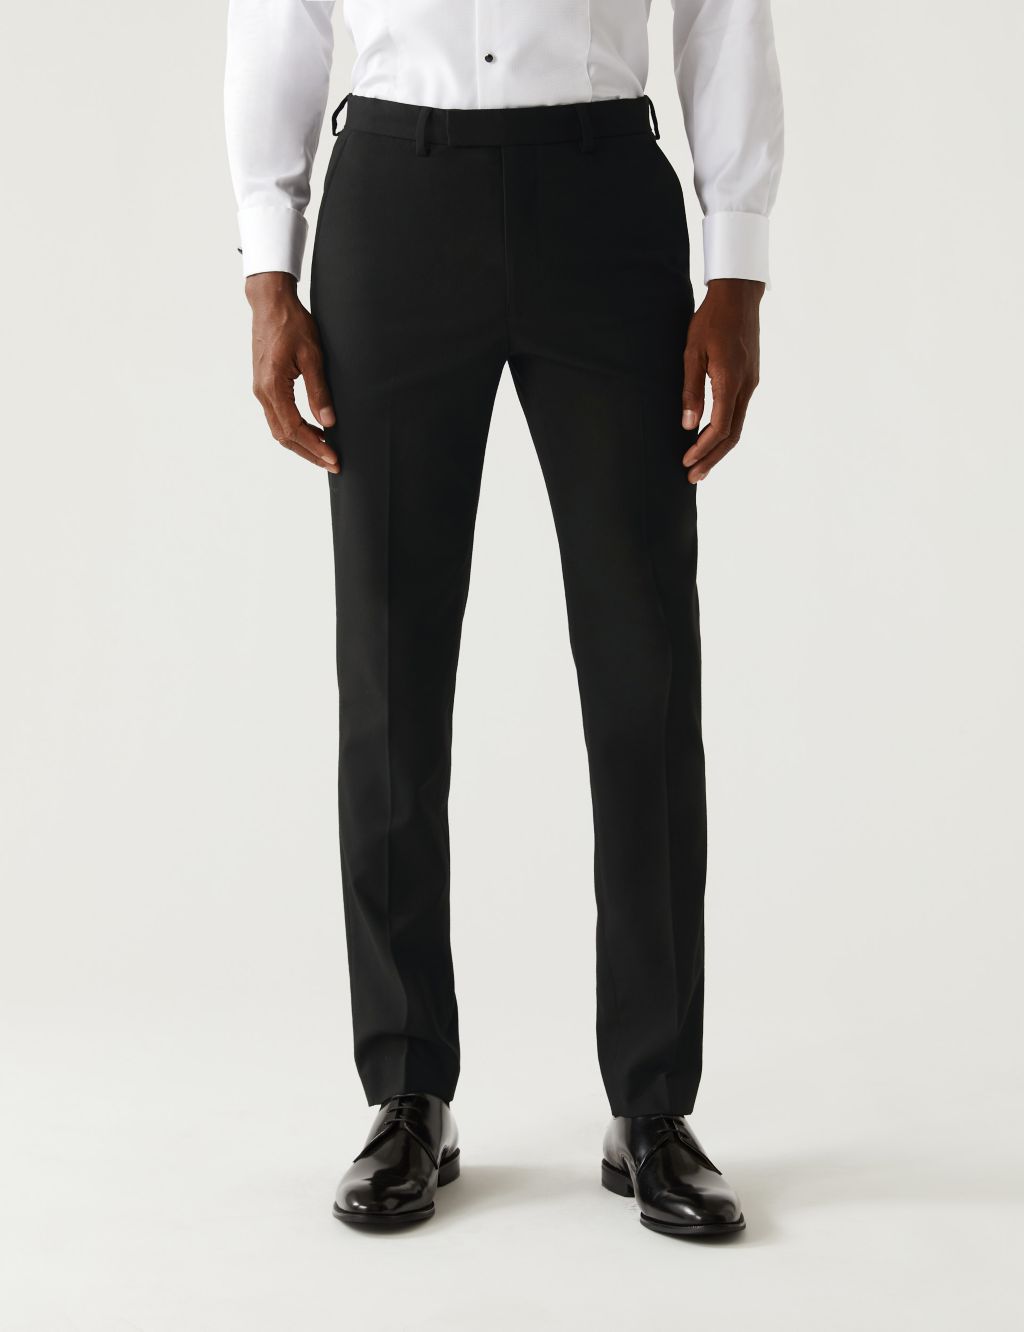 Black Skinny Fit Suit Trousers image 3